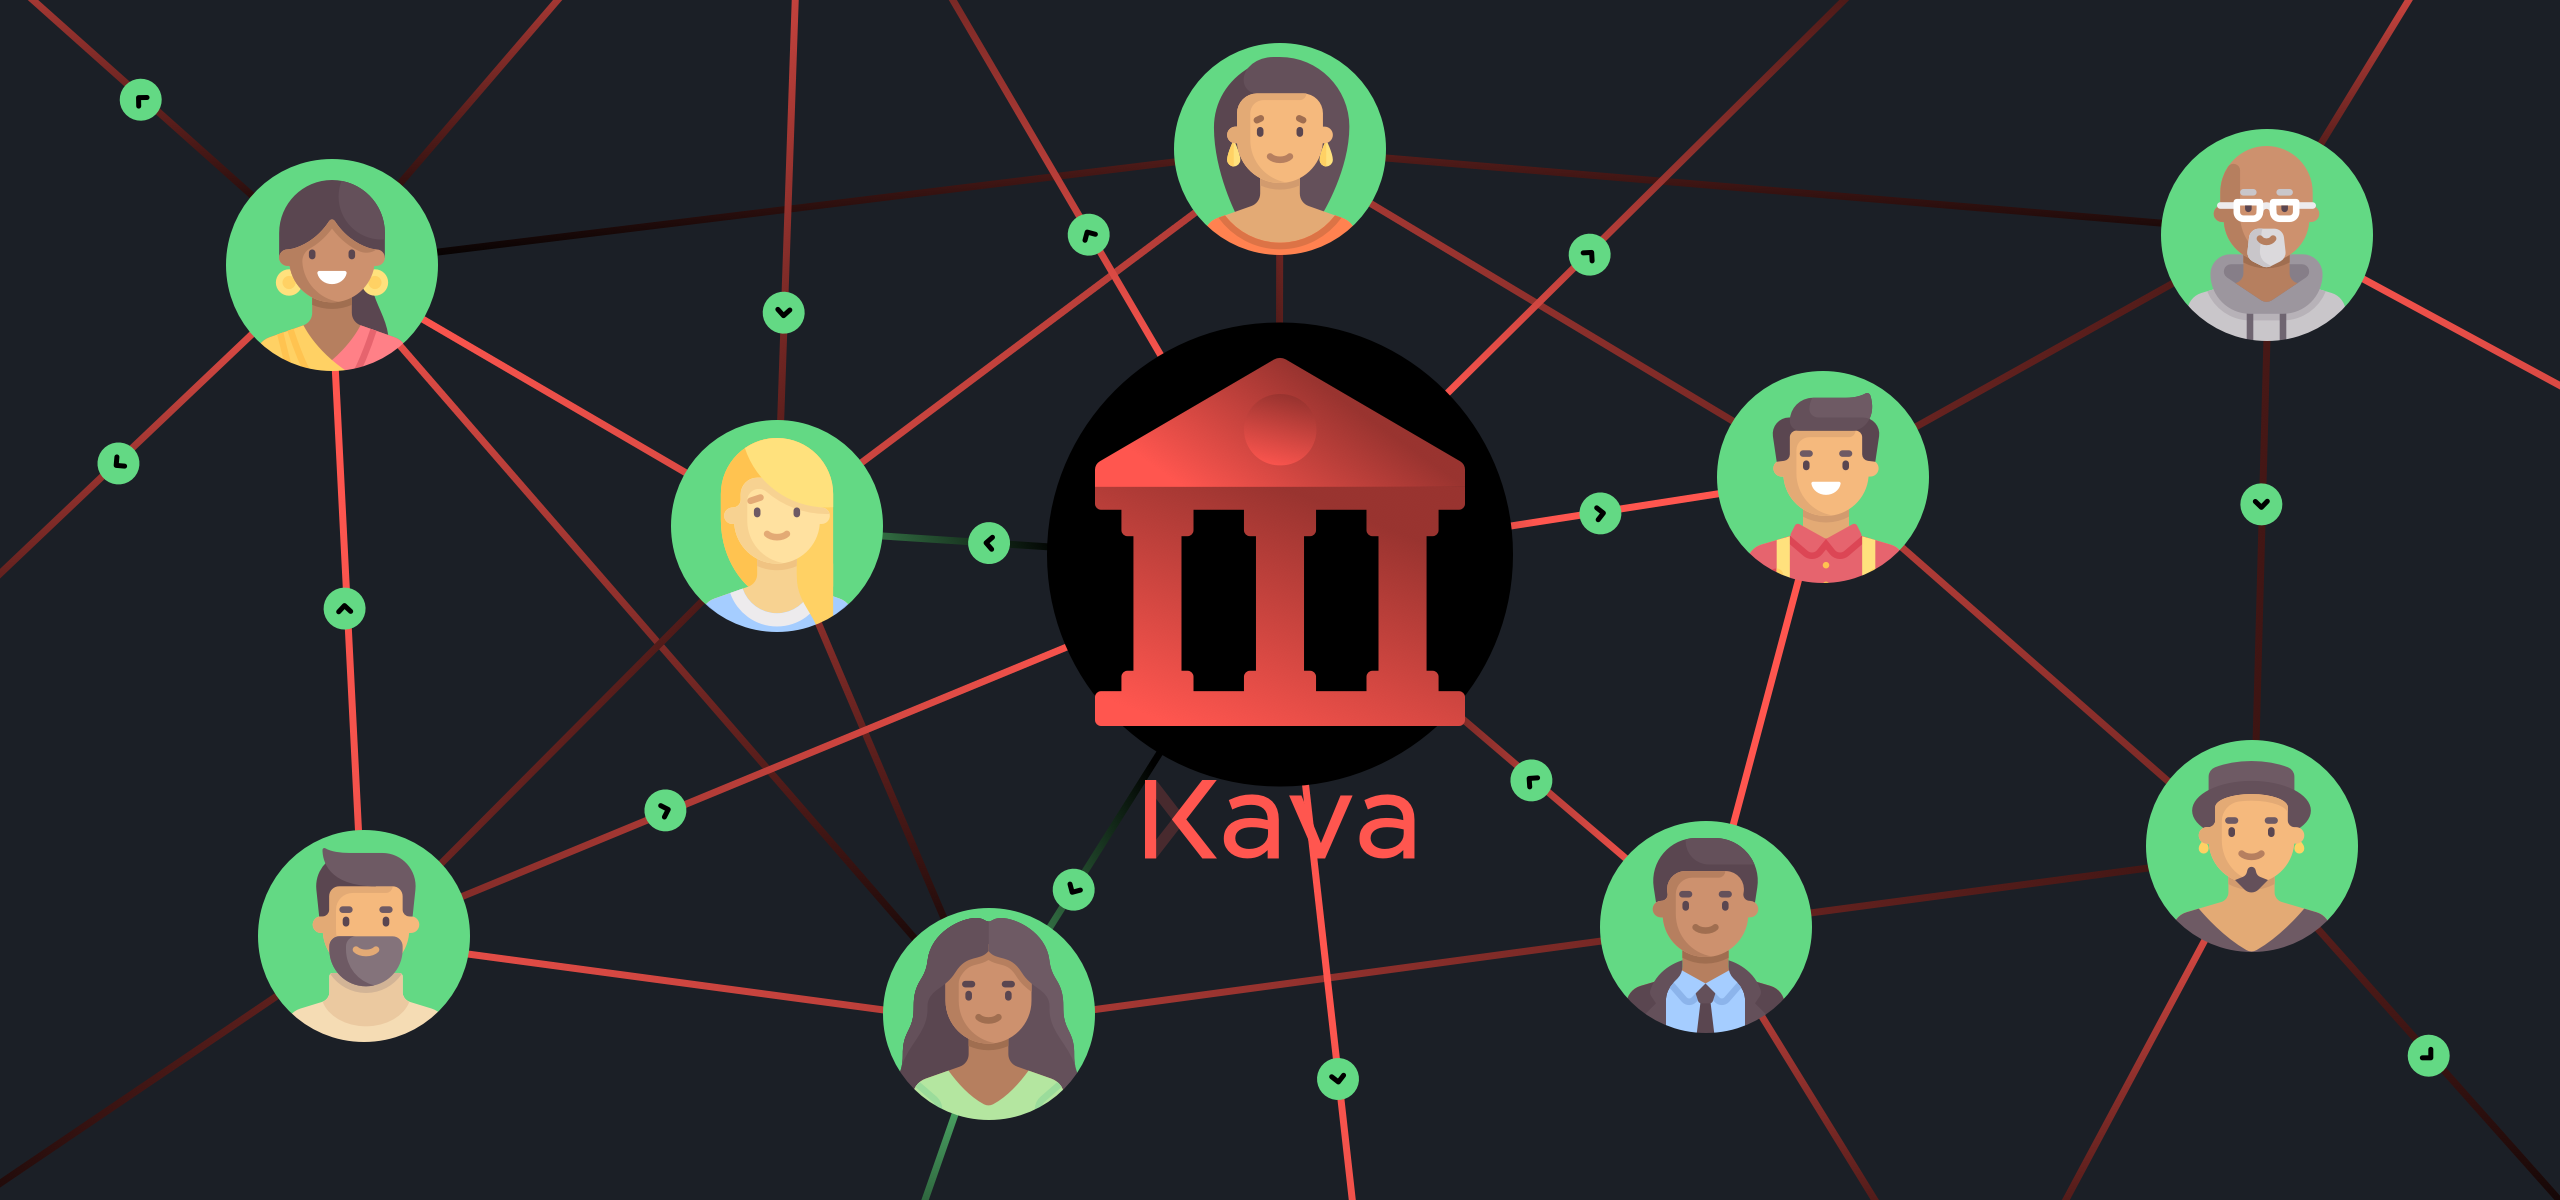 Kava - The first decentralized lending platform in Cosmos